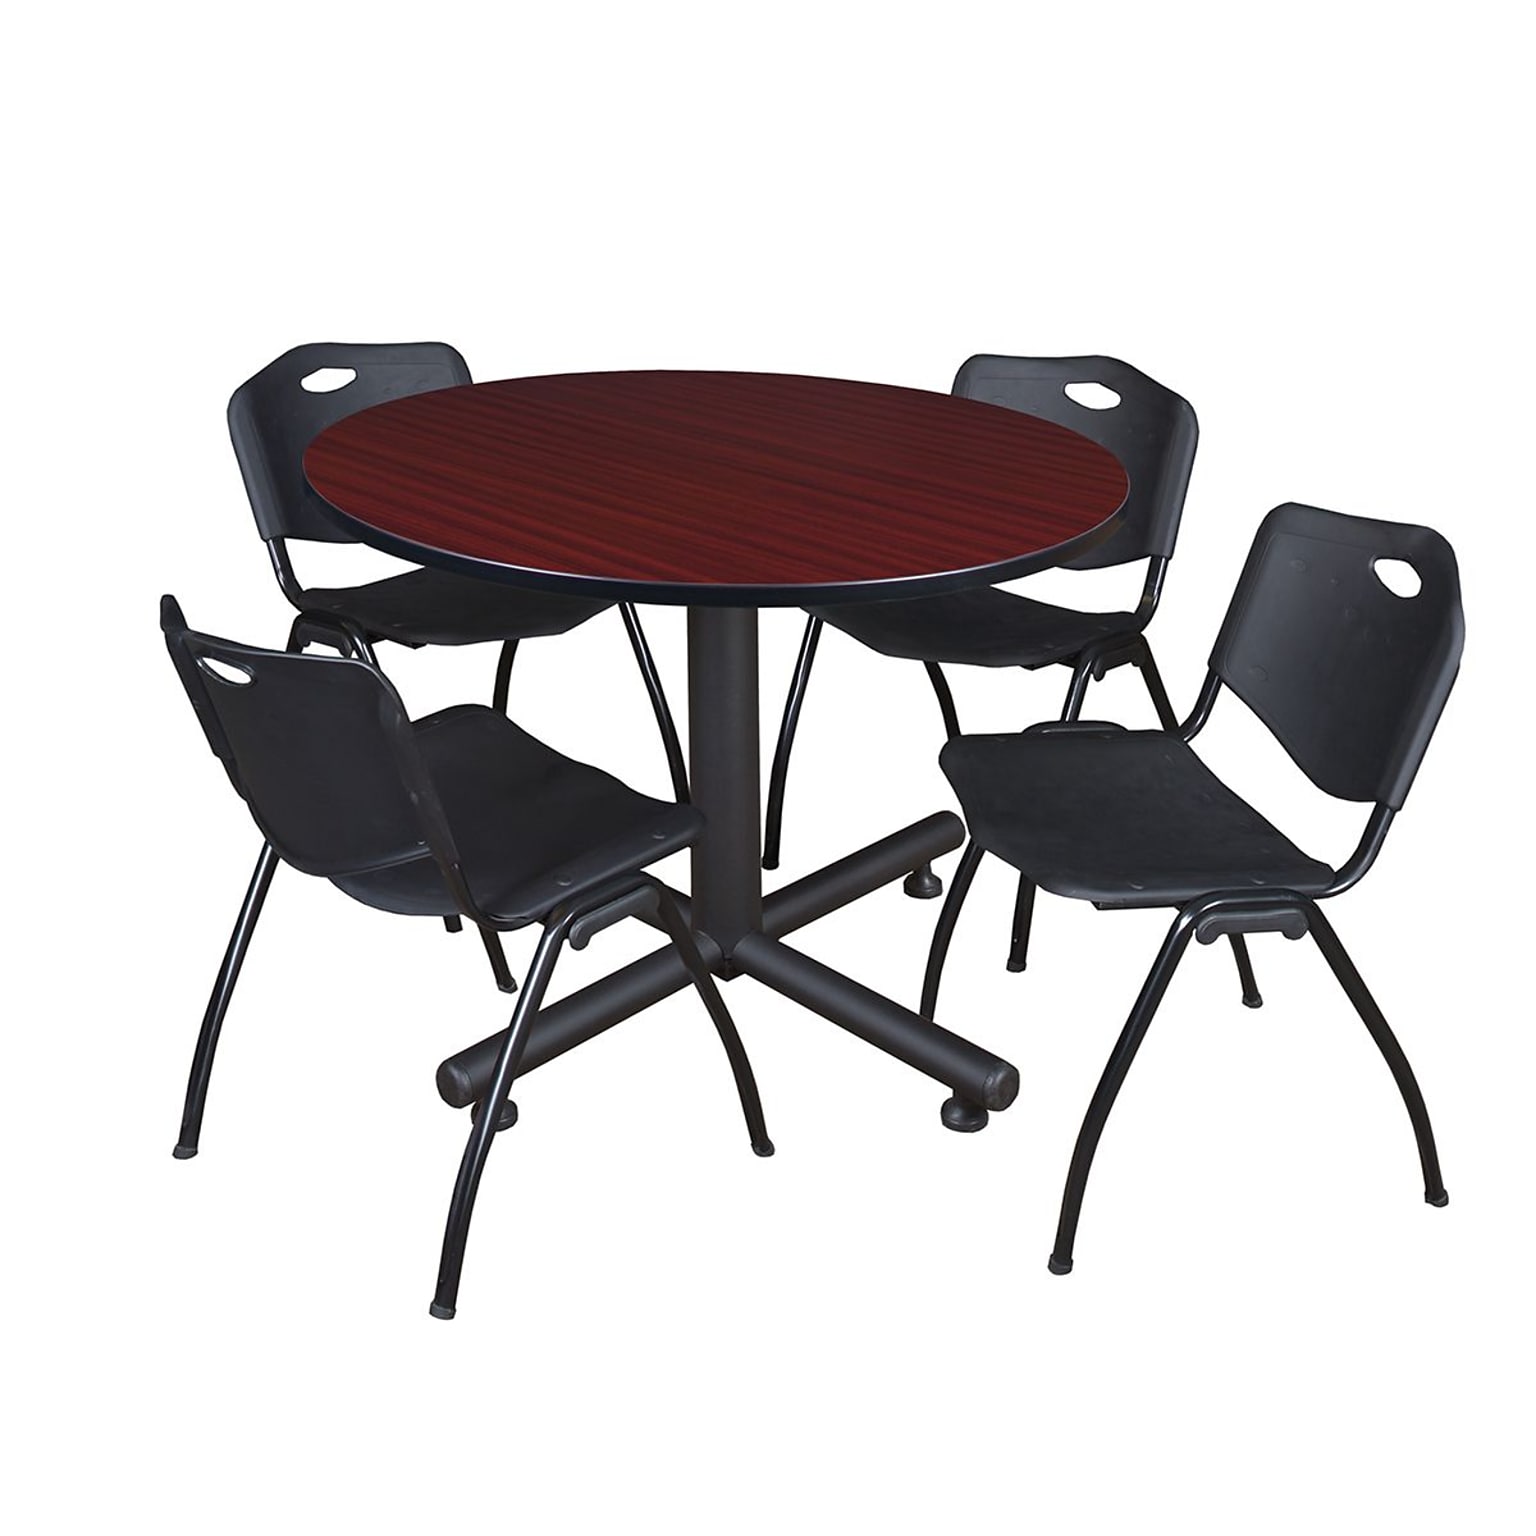 Regency 48-inch Round Laminate Lunch Room Table With 4 M Stacker Chairs, Black (TKB48RNDMH47BK)